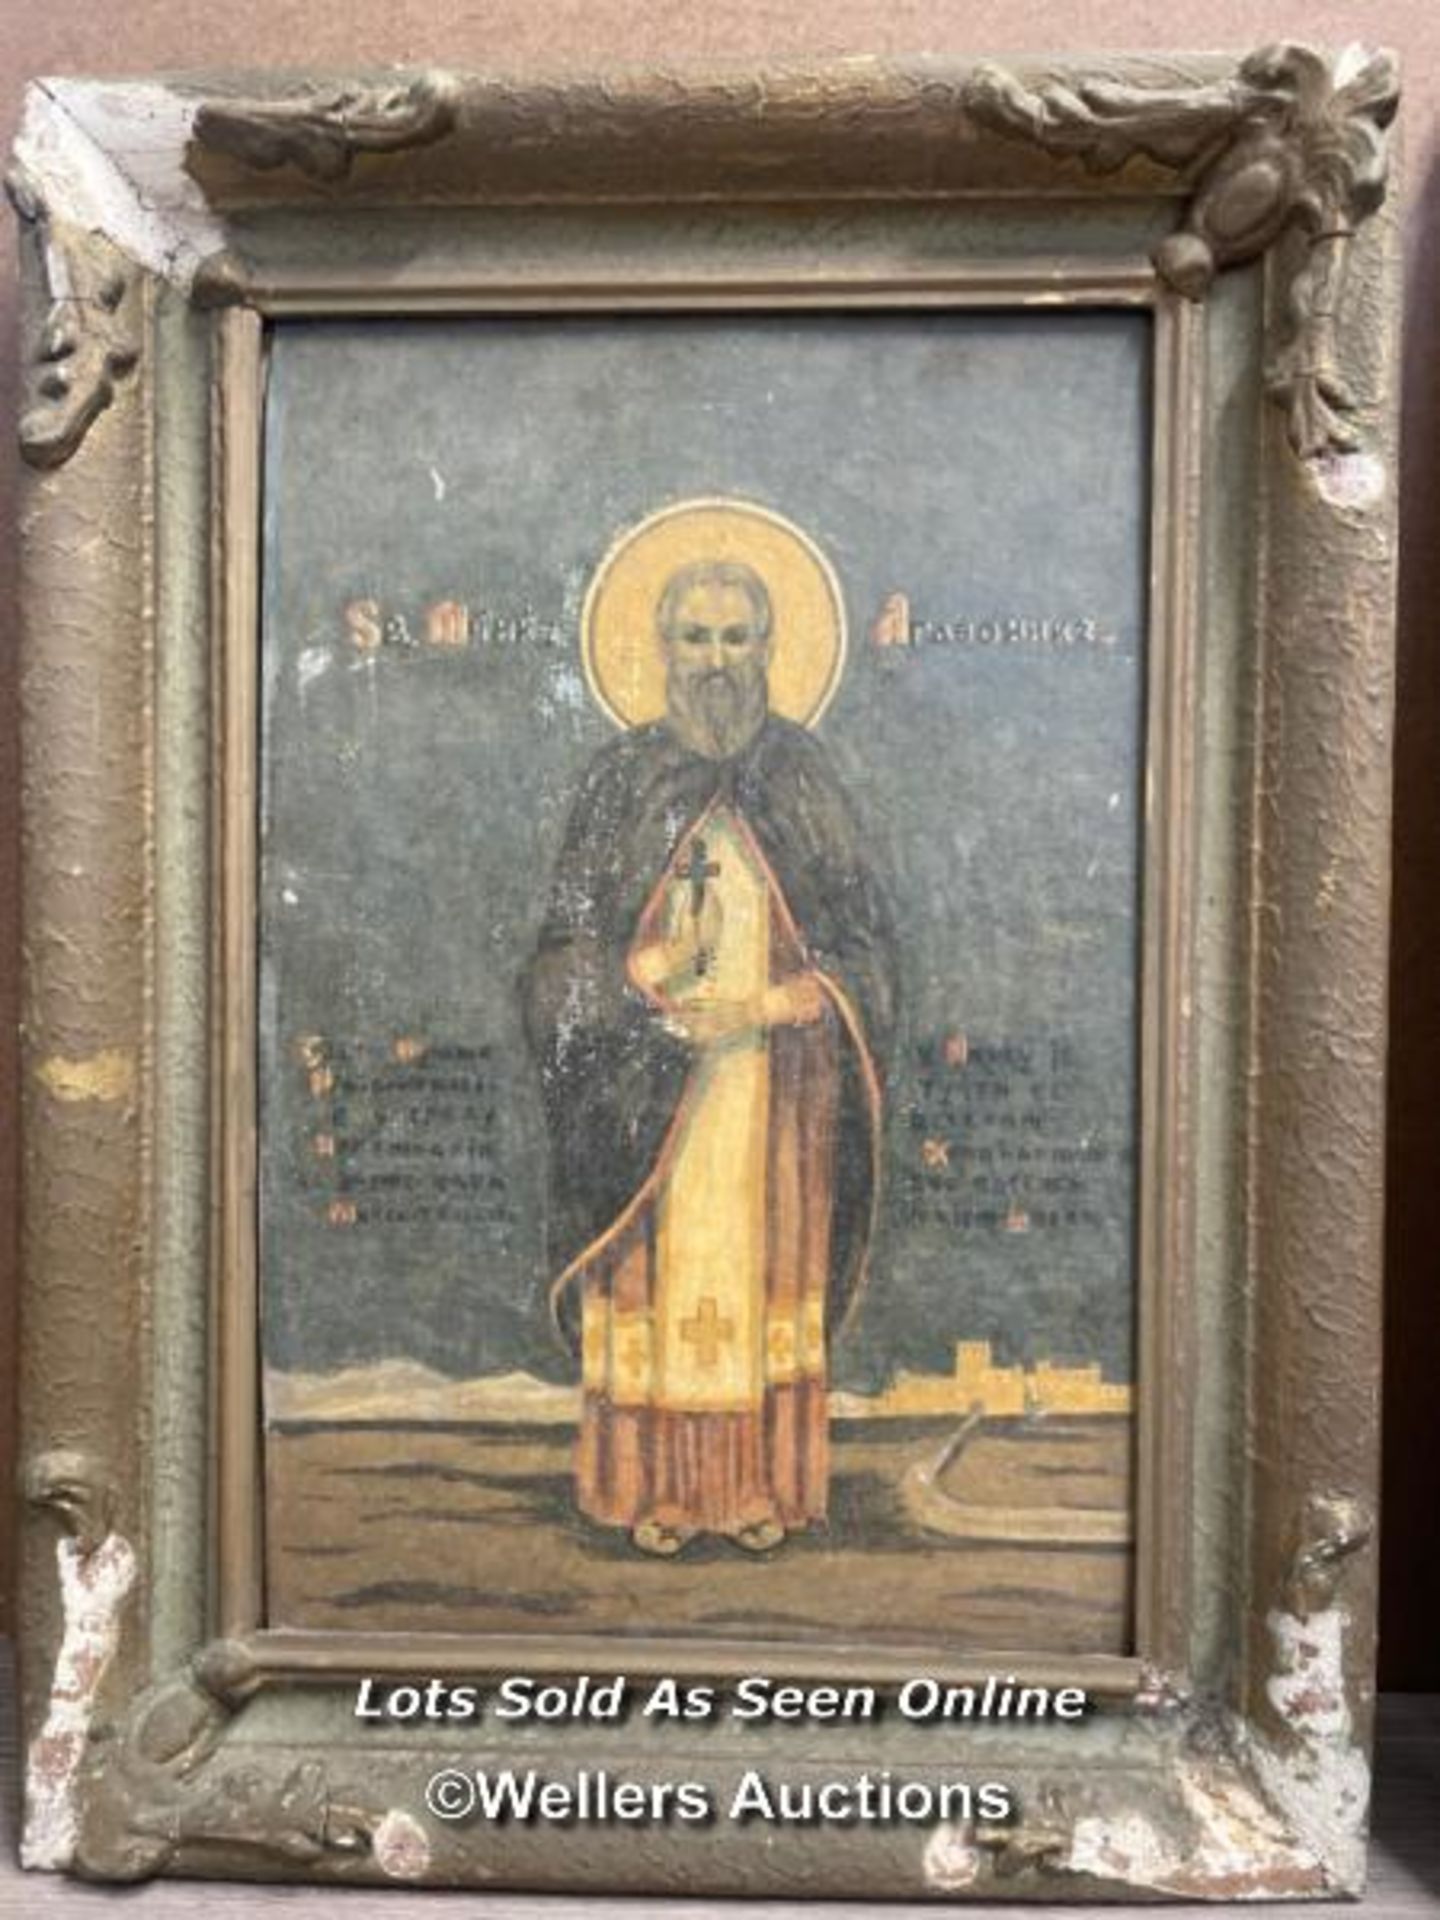 TWO OLD RELIGIOUS ICONS, PAINTED ON BOARD AND FRAMED, LARGEST 34 X 55CM SIGNED. SMALLER 30 X 45CM - Image 6 of 12